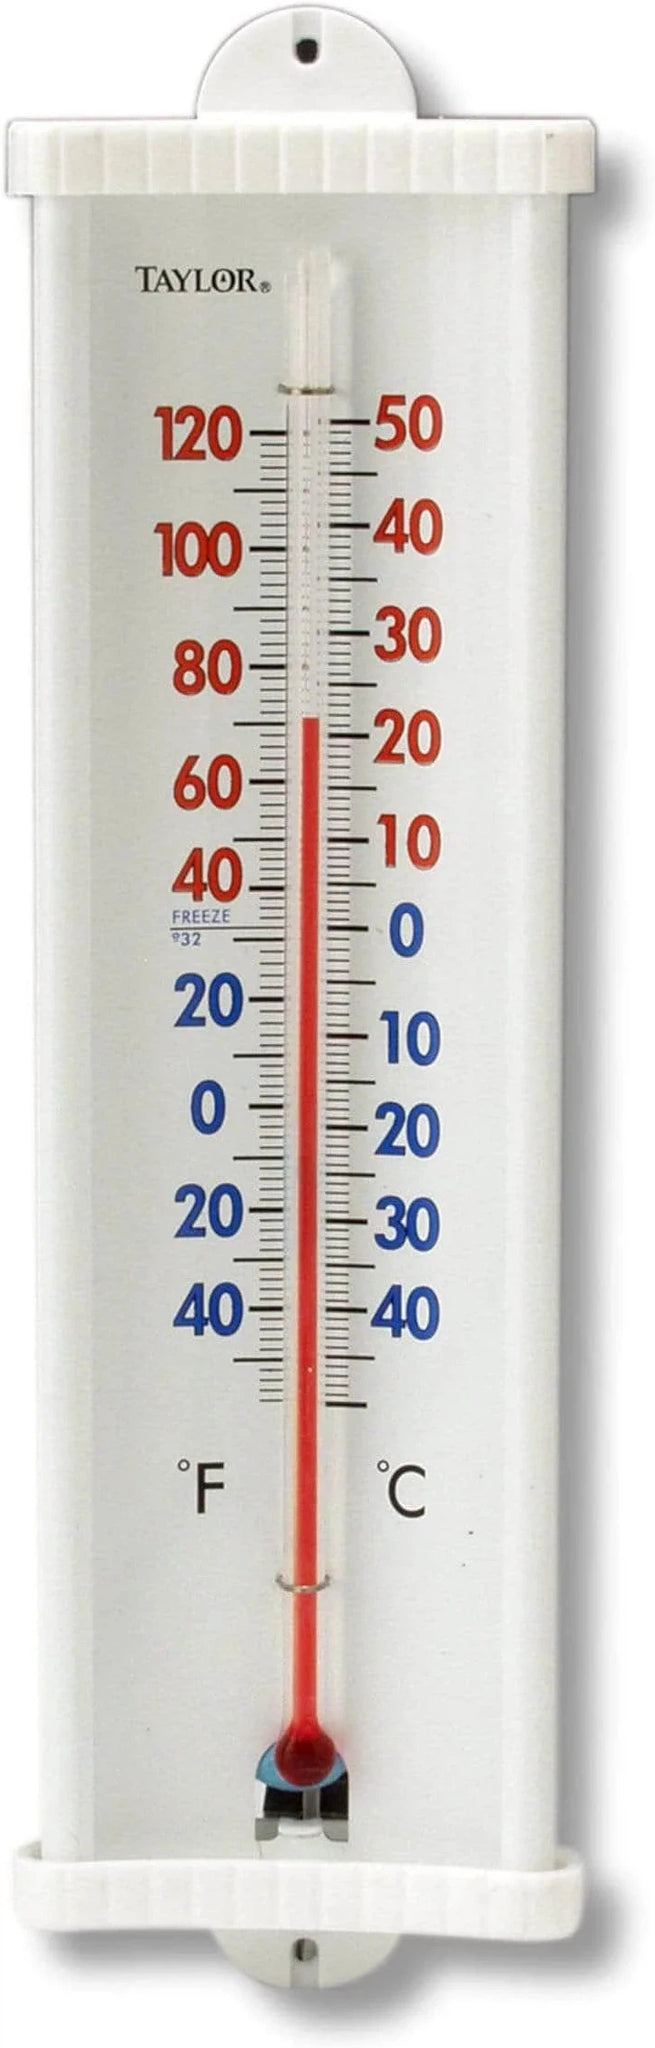 Taylor - White Aluminum Back With Plastic Endcaps Utility Wall Thermometer - 5132N